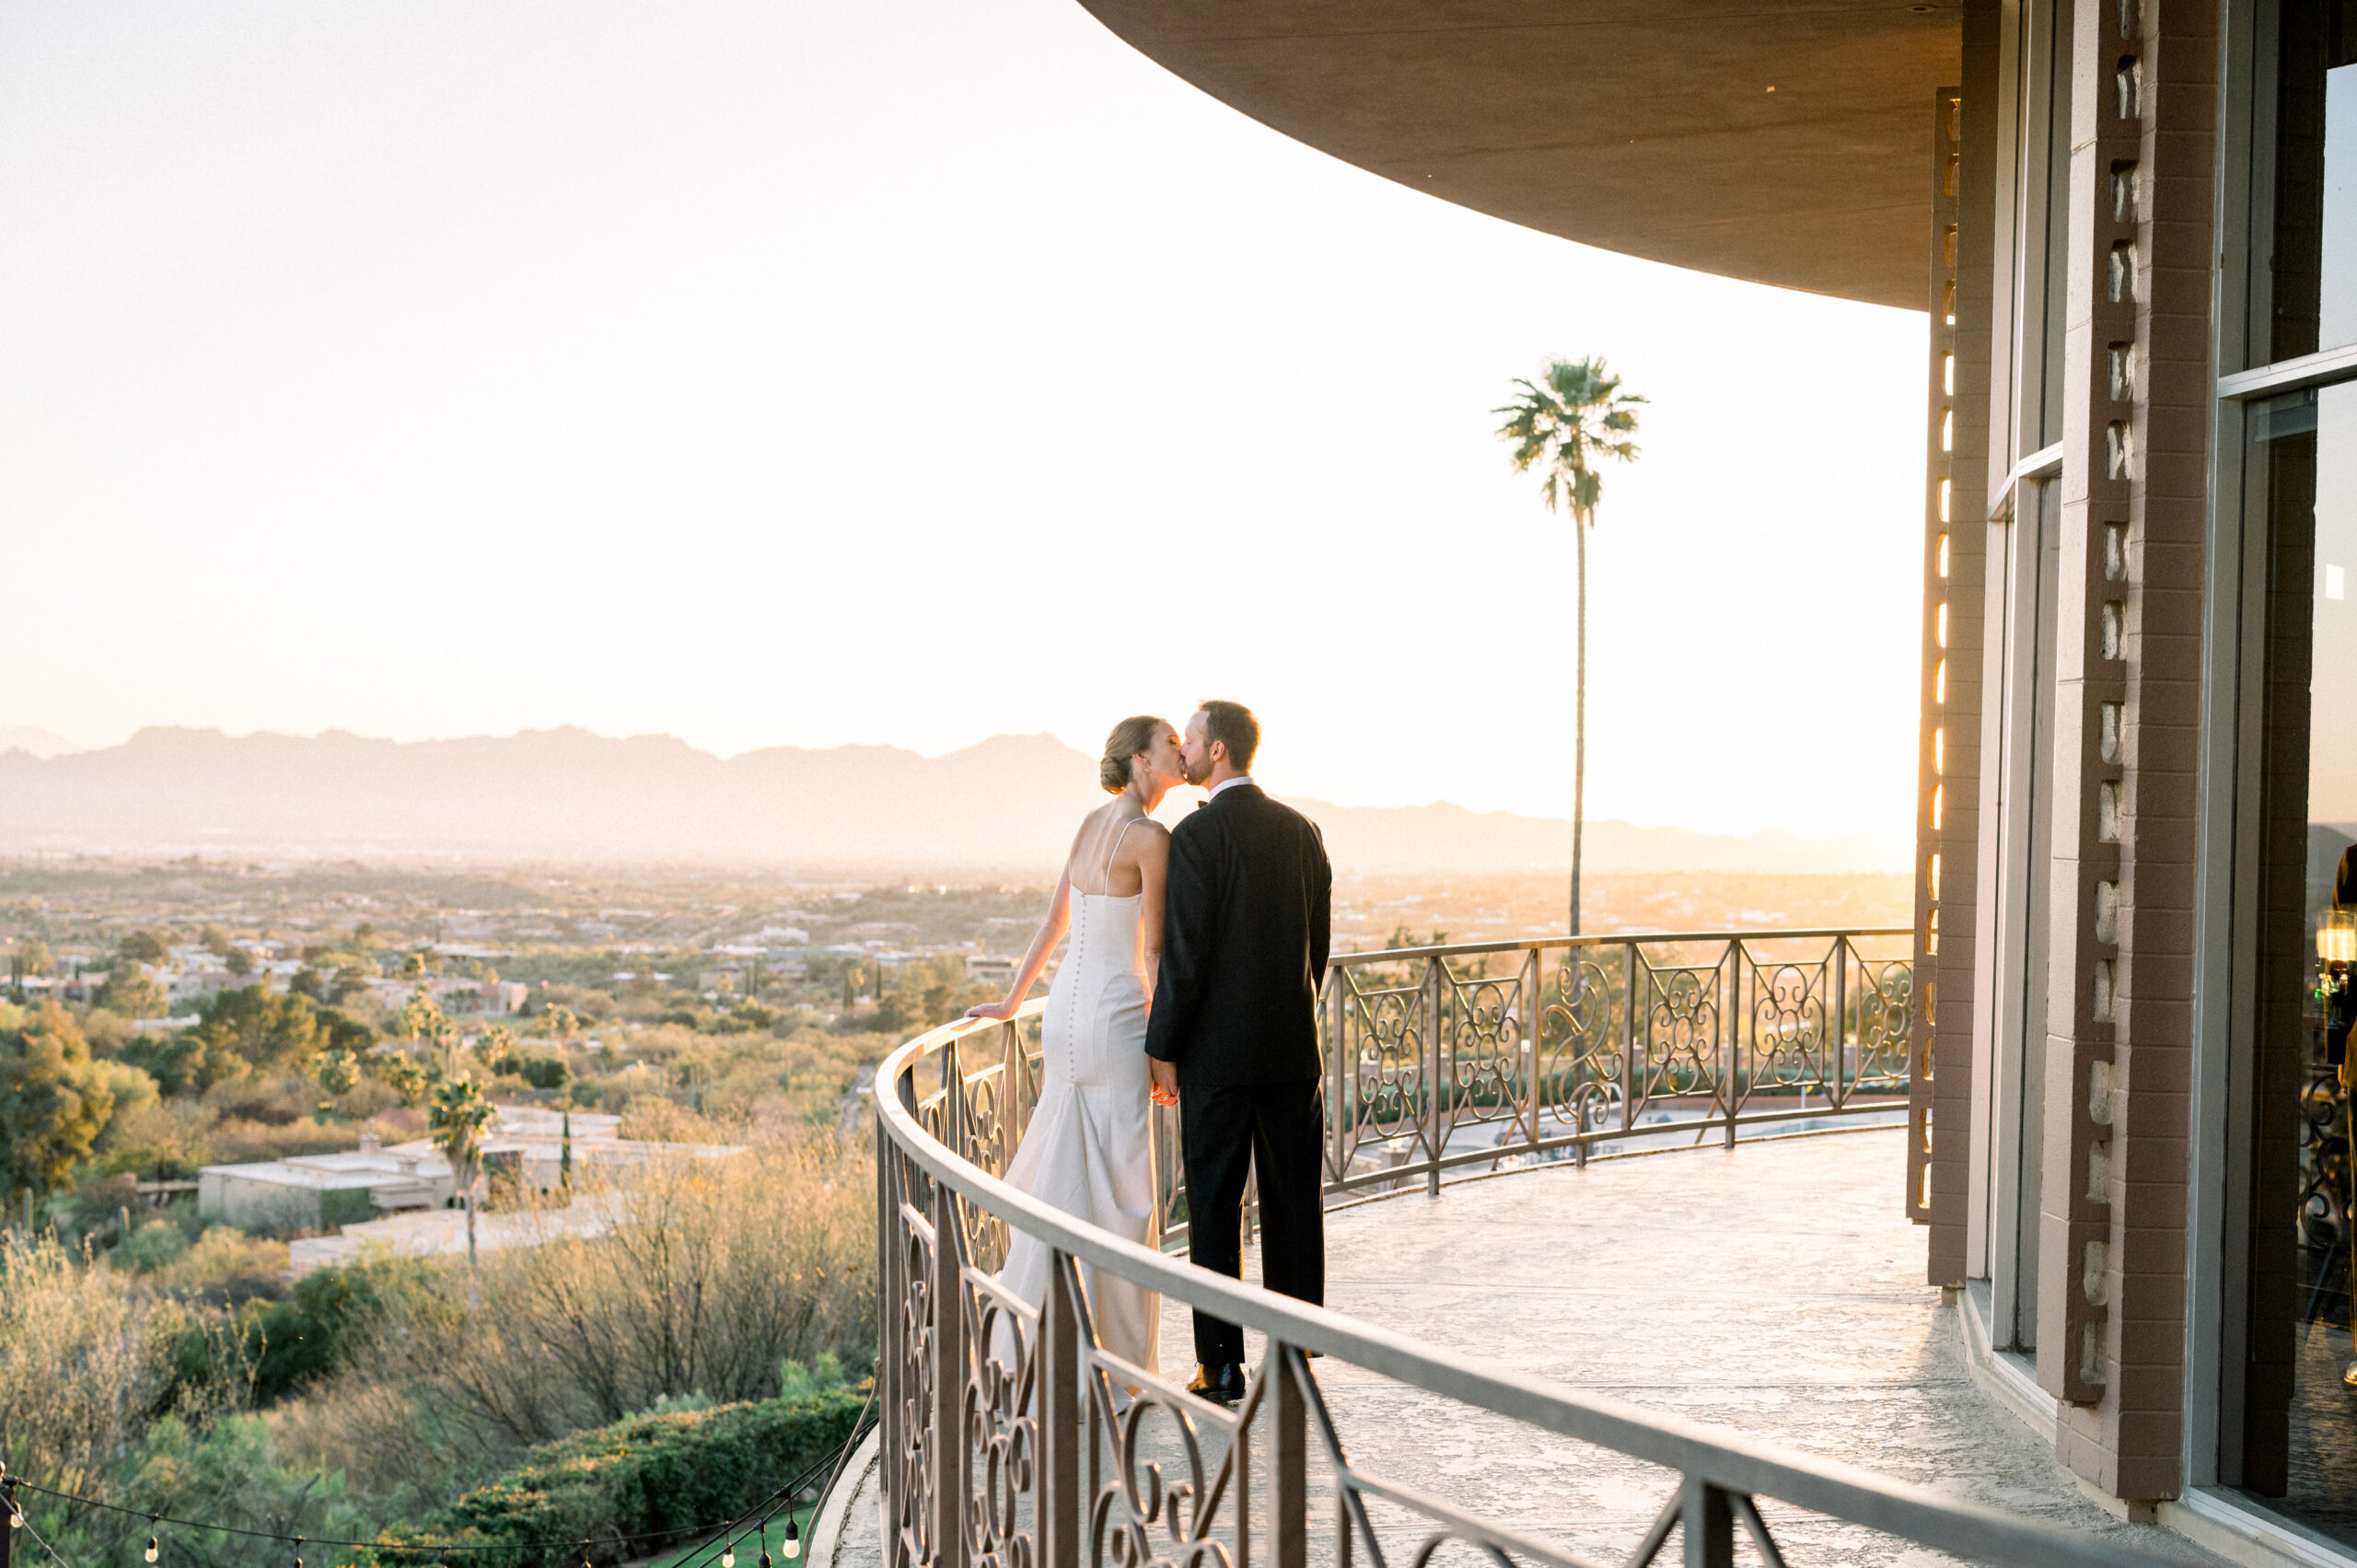 A stunning and timeless black and white wedding at the beautiful Skyline Country Club in Tucson, Arizona during the spring time!